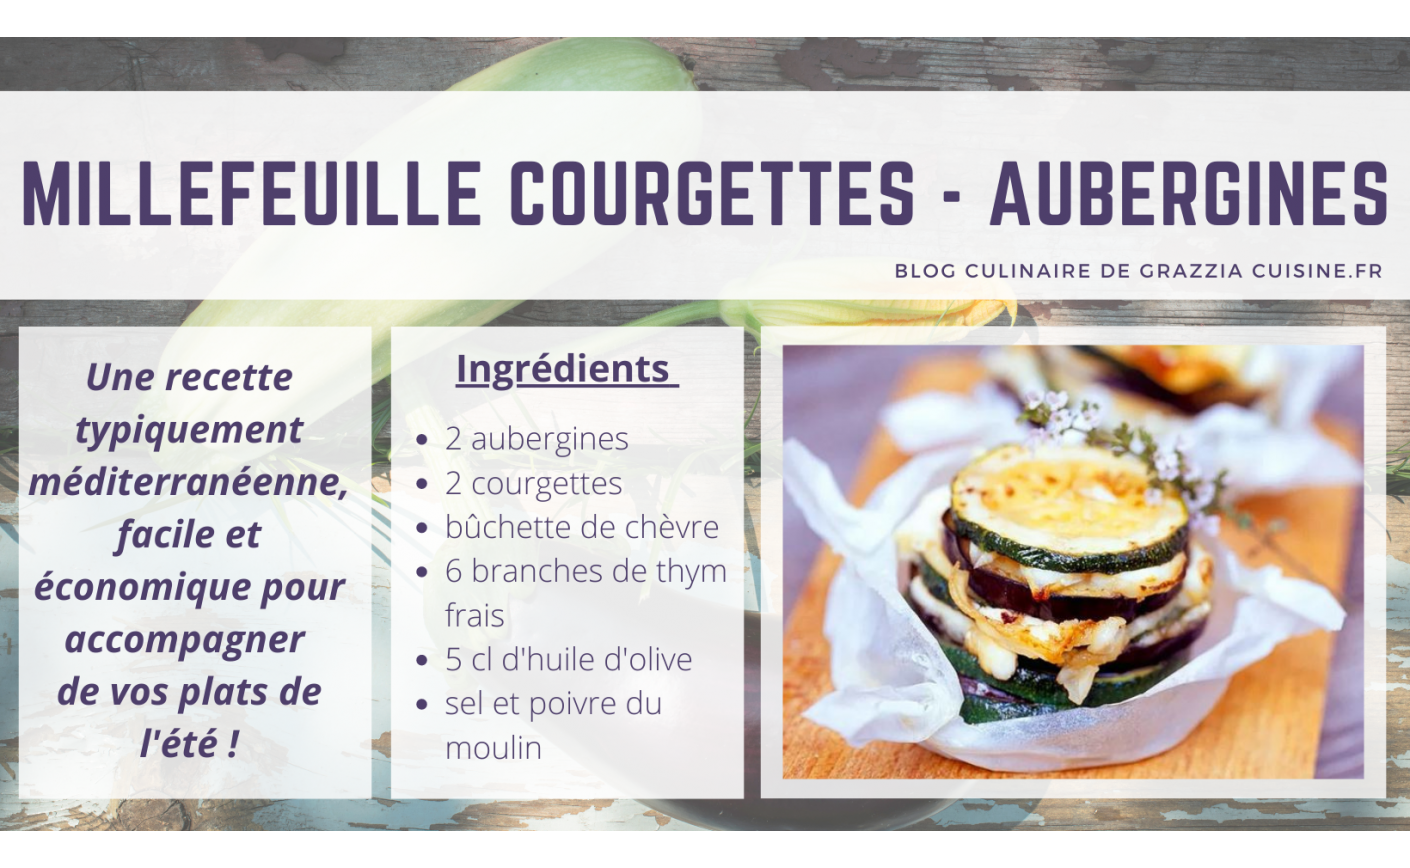 MILLEFEUILLE COURGETTES - AUBERGINES